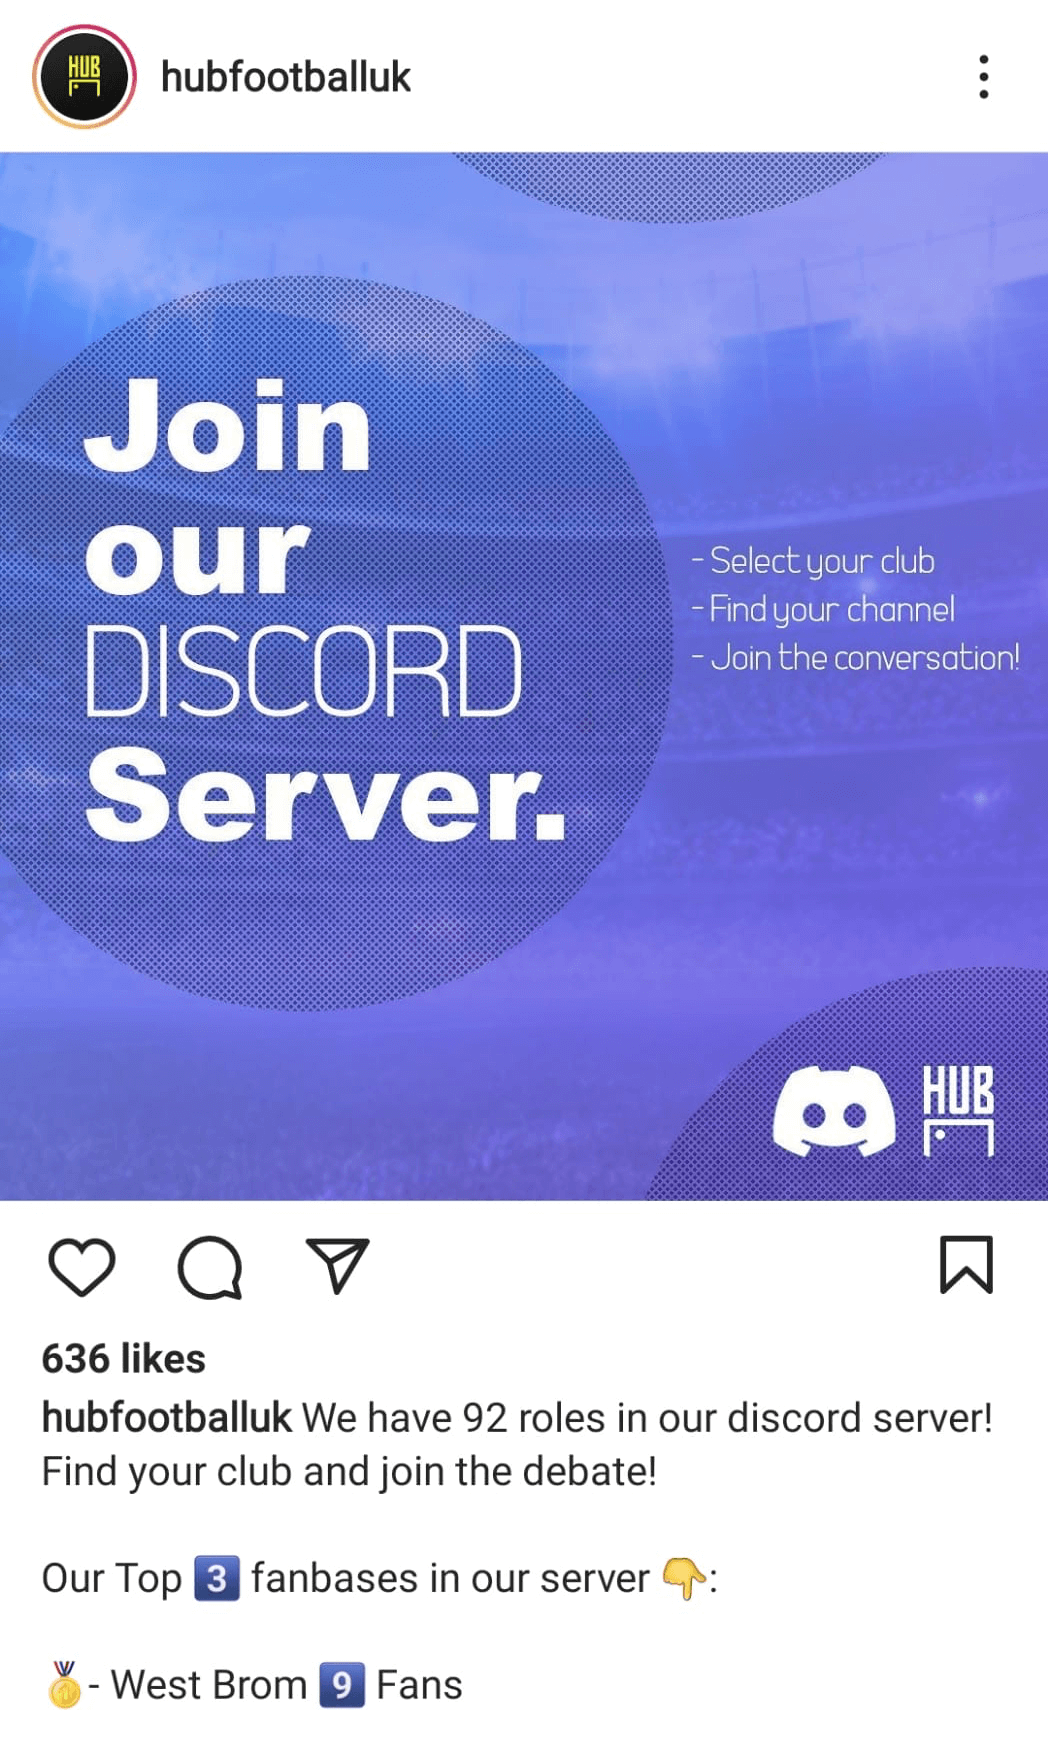 JOIN THE DISCORD! —